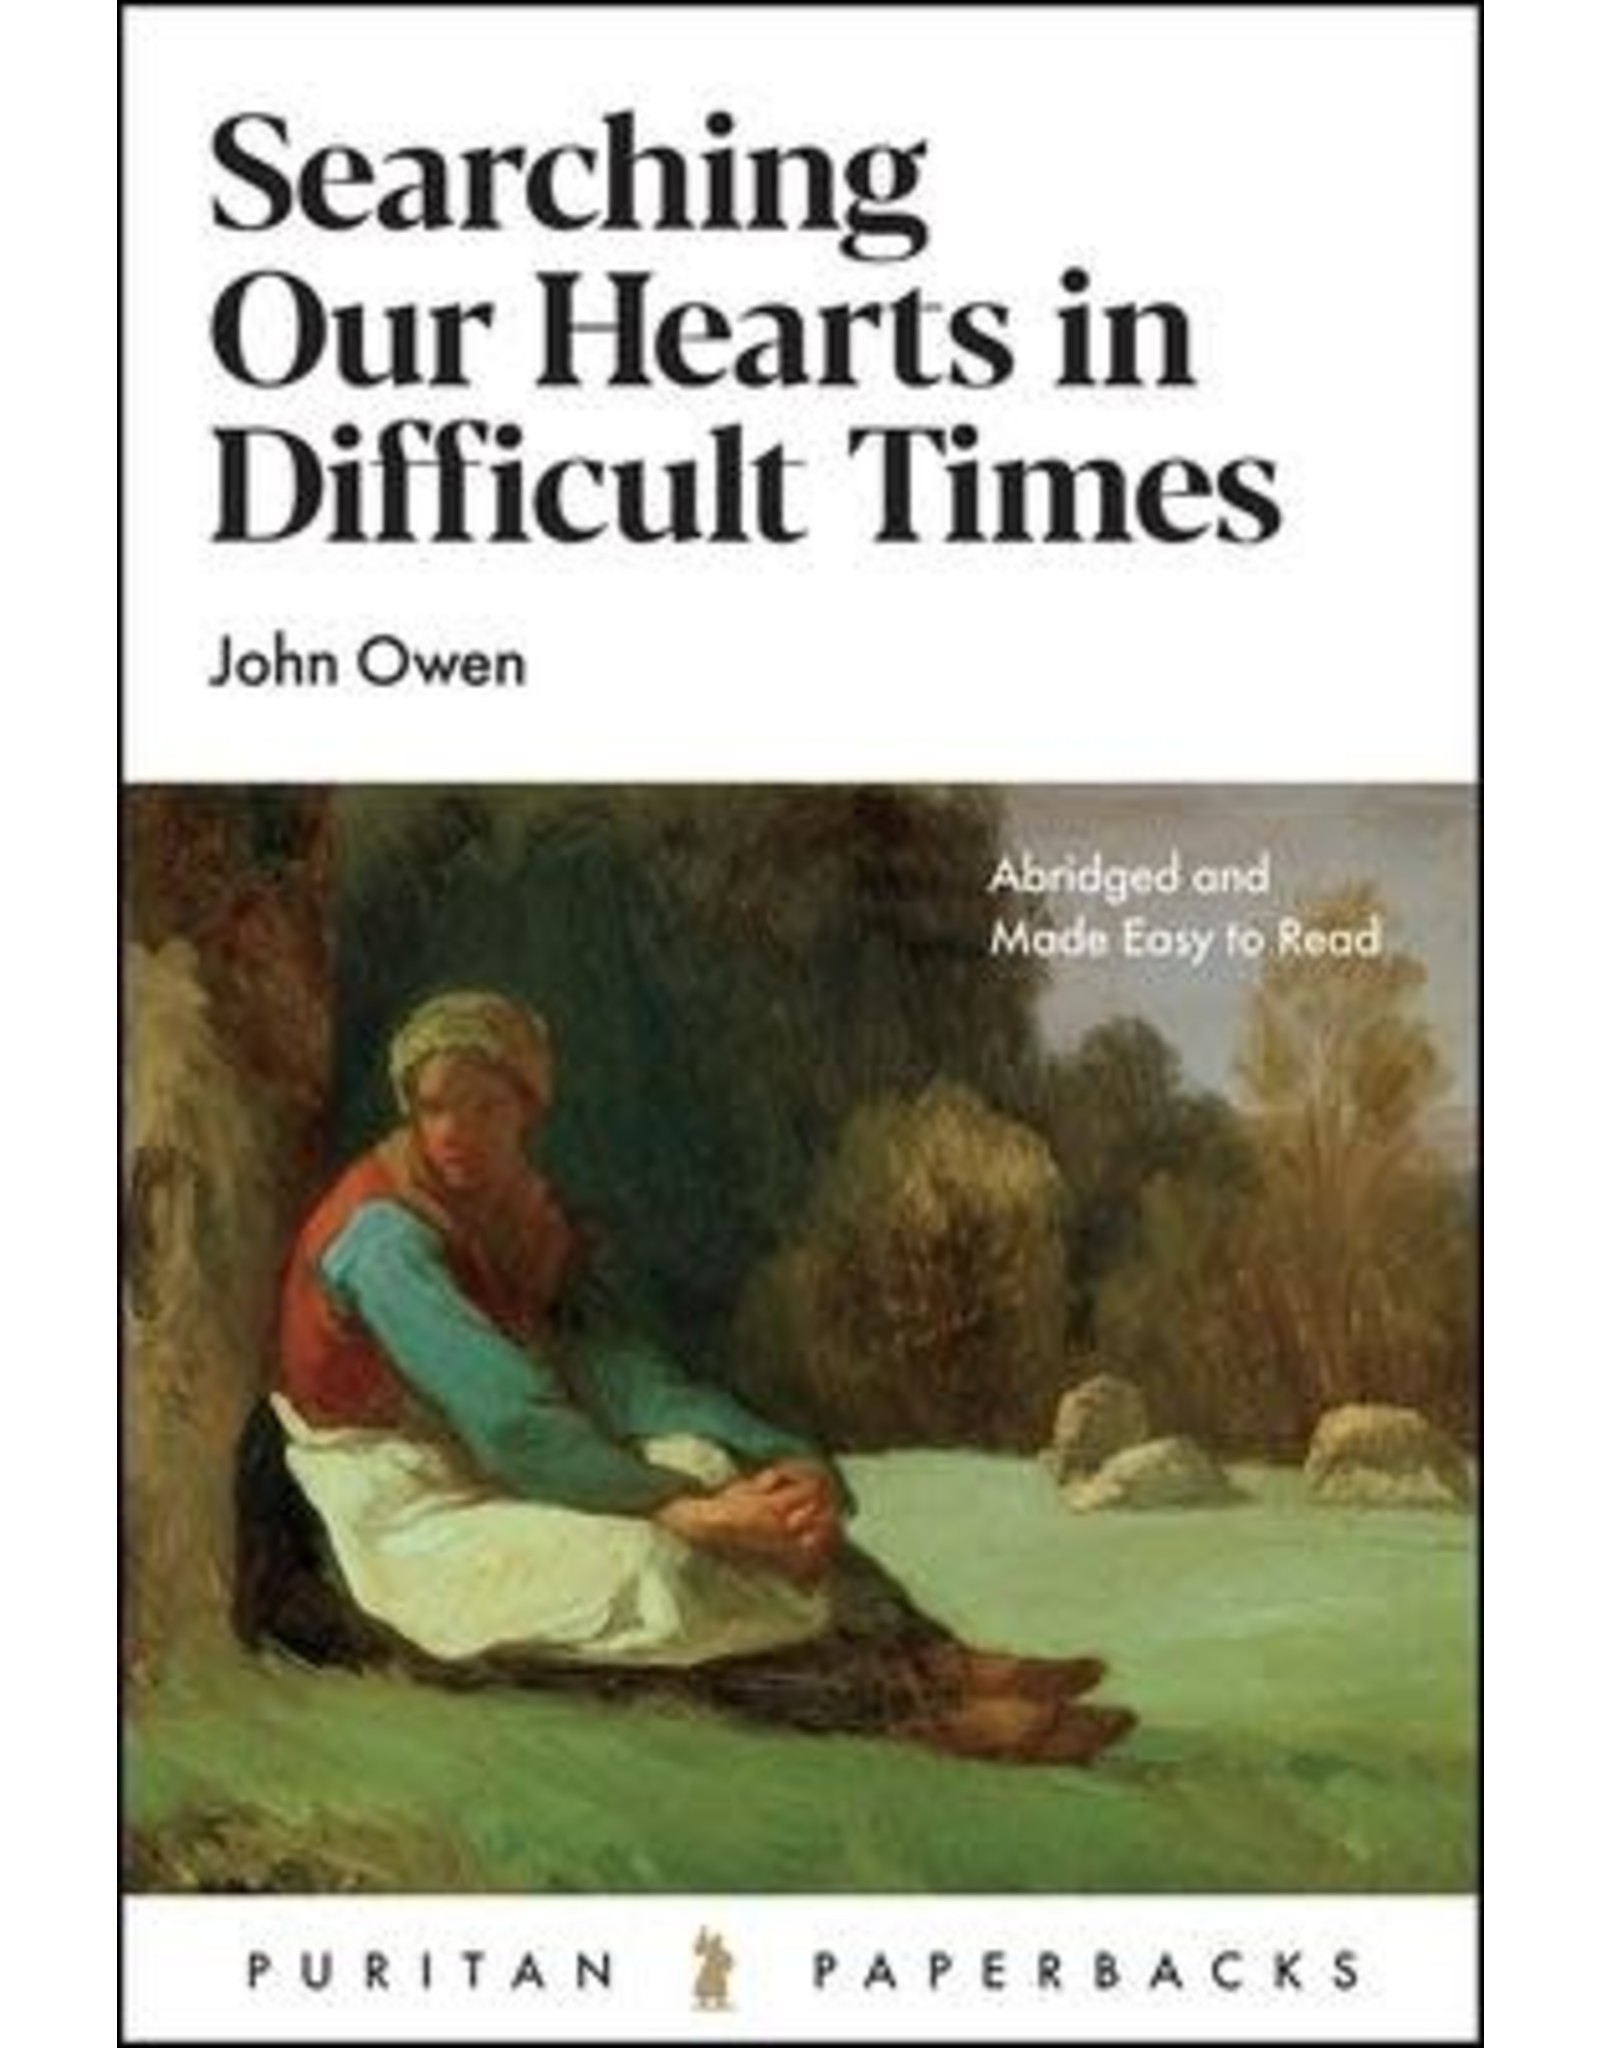 John Owen Searching our Hearts in Difficult Times(Puritan Paperbacks)